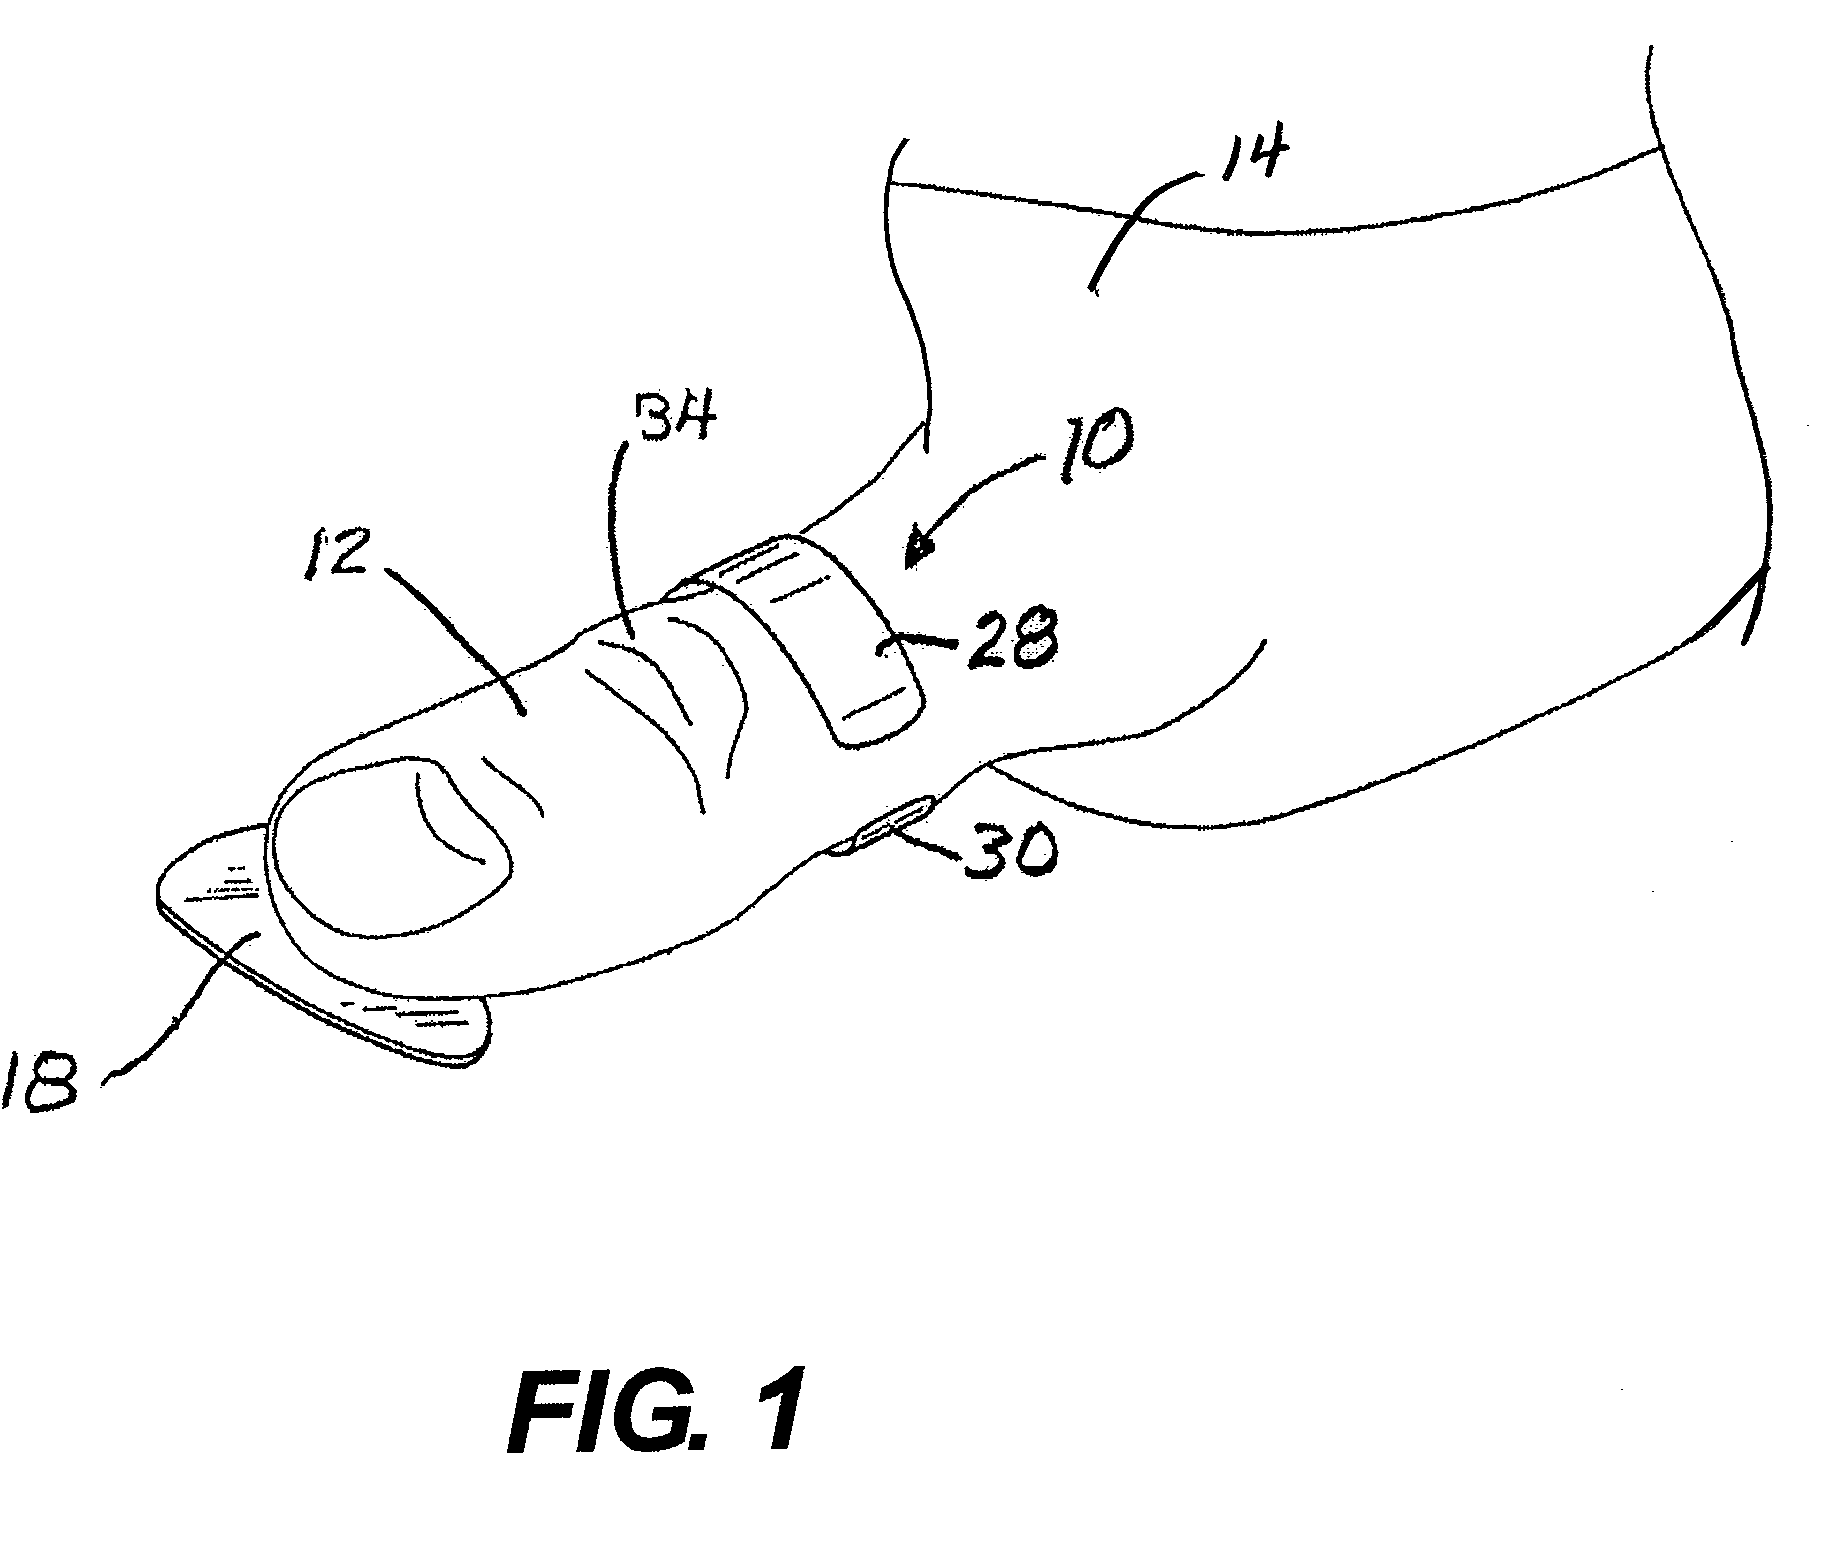 Pick assembly for playing a stringed musical instrument